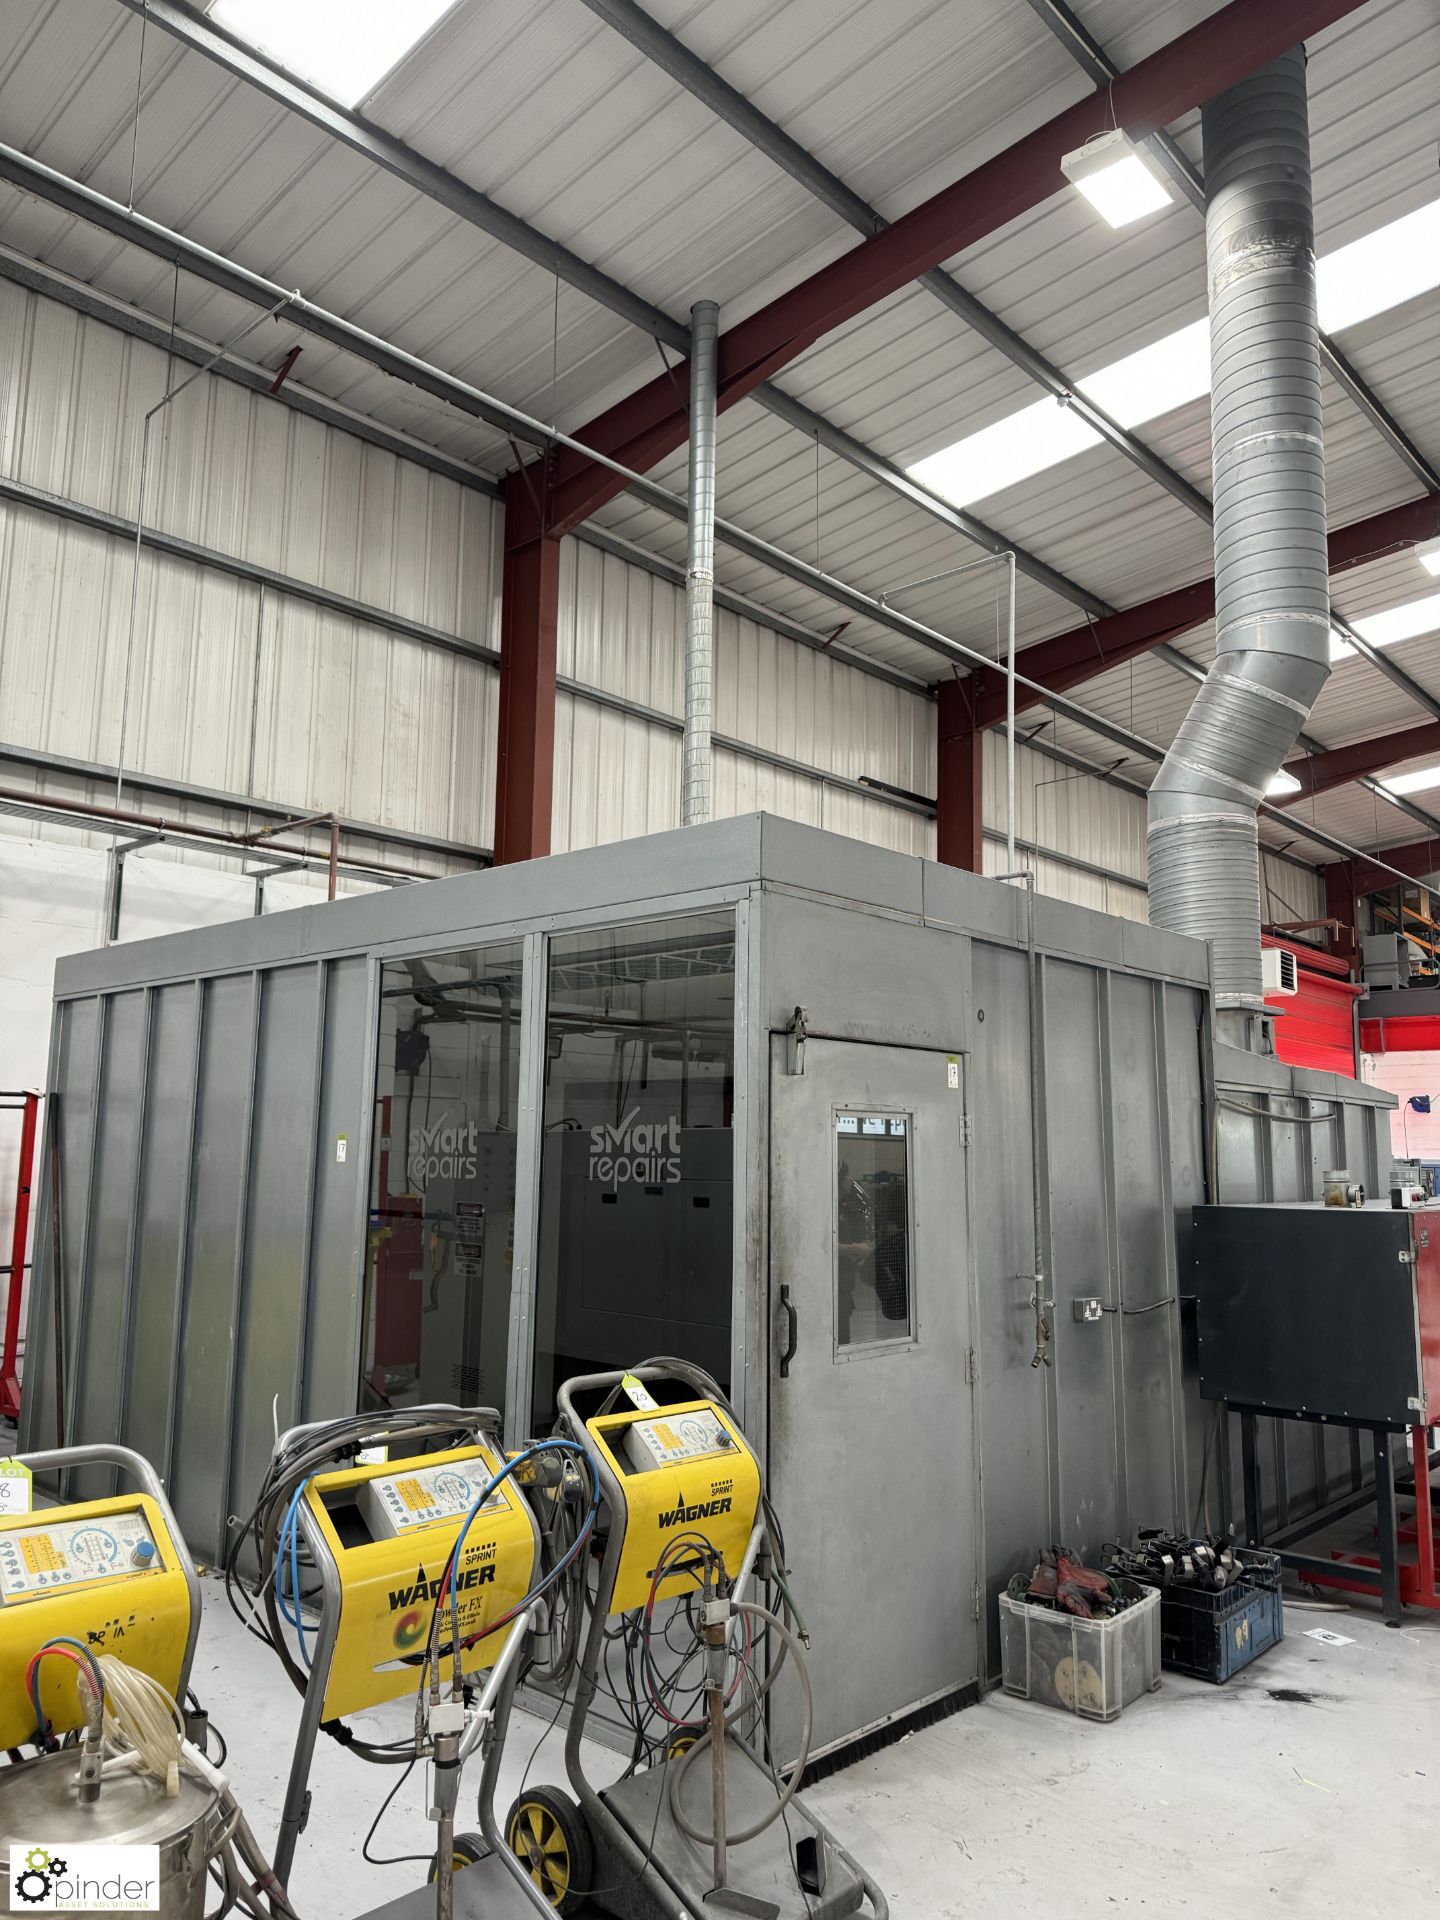 Greenair galvanised combined Wheel Spray Booth and gas fired Curing Oven, spray booth 1800mm x 900mm - Image 2 of 18